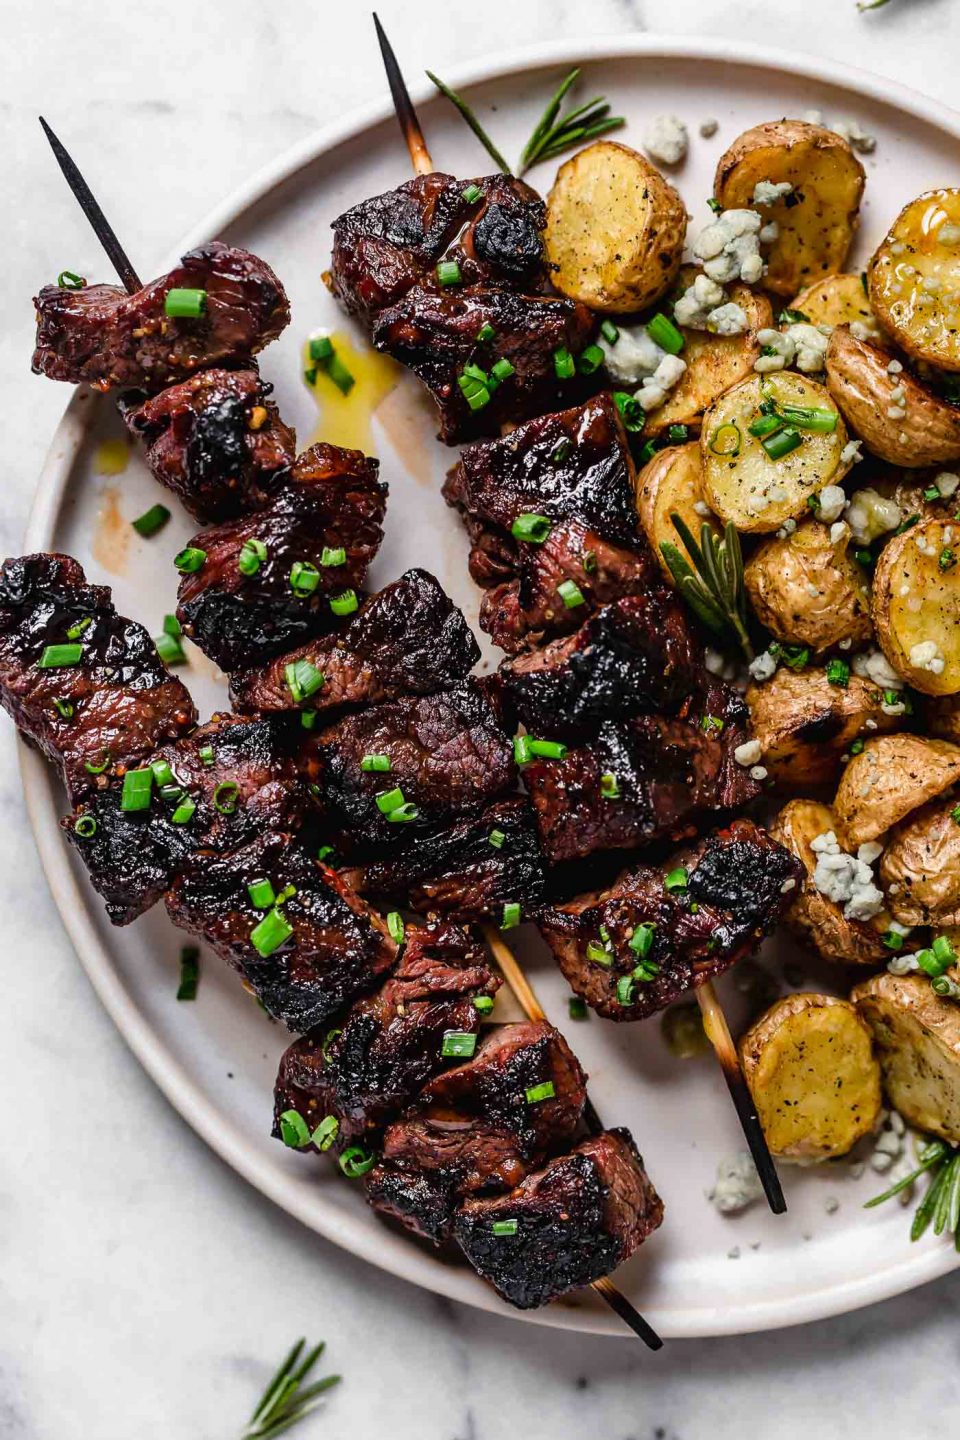 Sirloin steak kabobs are arranged atop a white plate alongside grilled baby potatoes. The meal has been garnished with fresh snipped chives and crumbled bleu cheese.